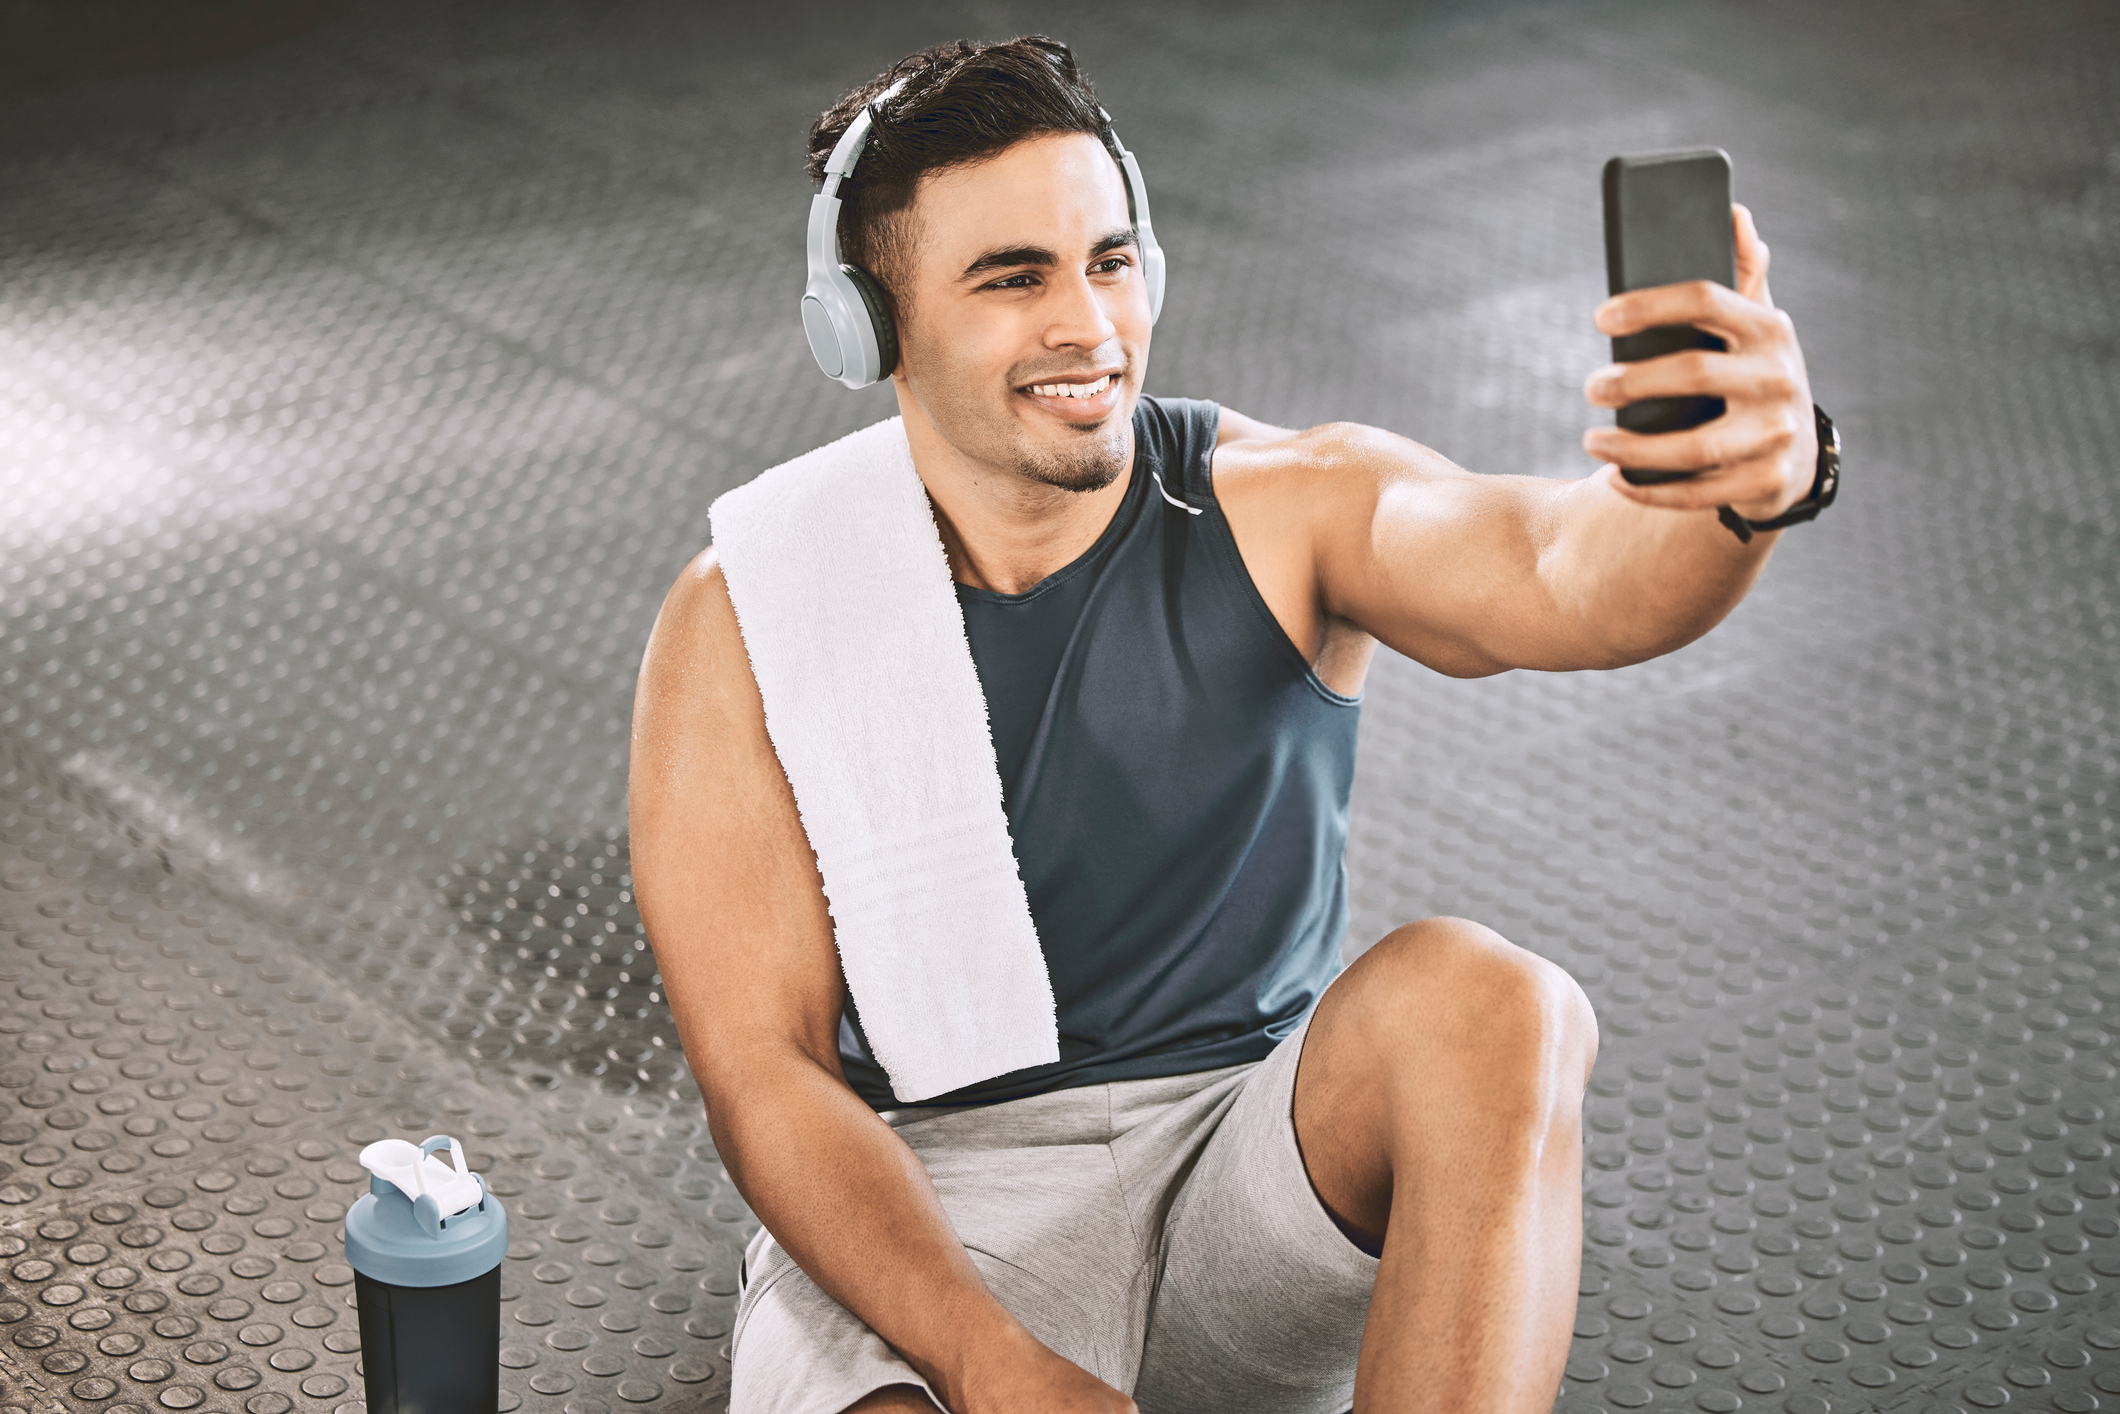 Man in a workout outfit with headphones and a towel on his shoulder taking a selfie